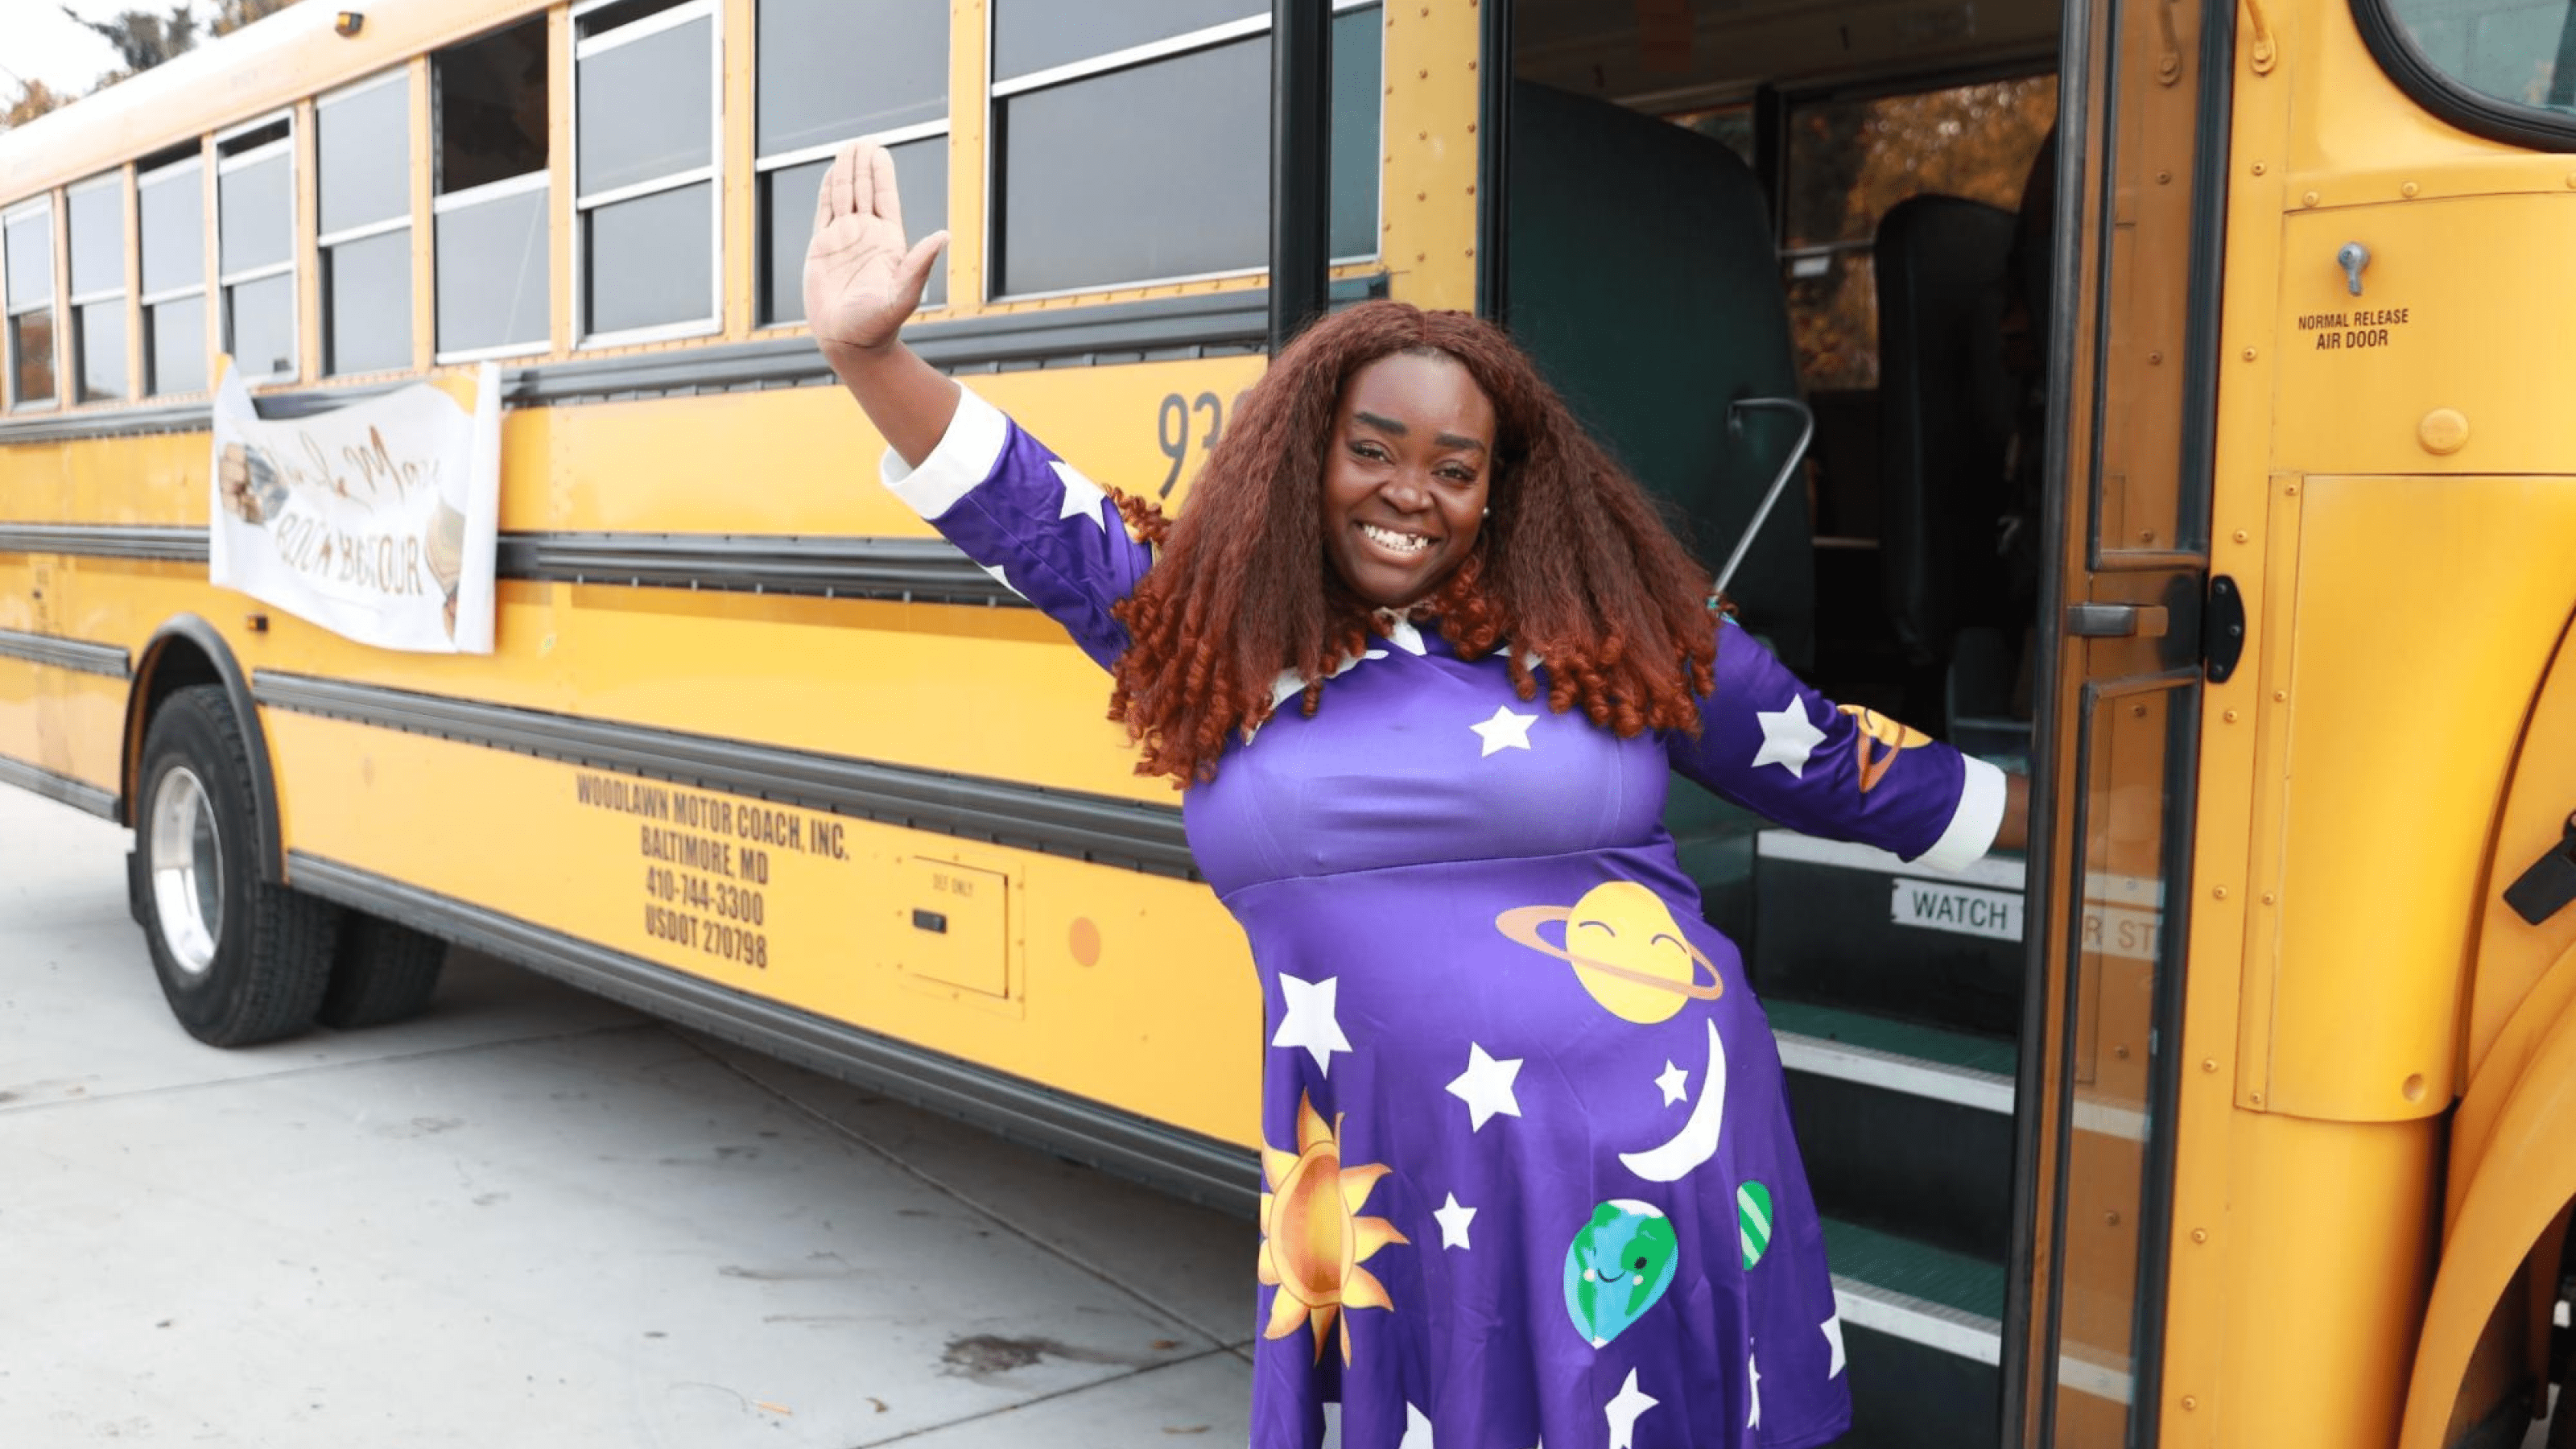 Event creator stands outside of a school bus waving